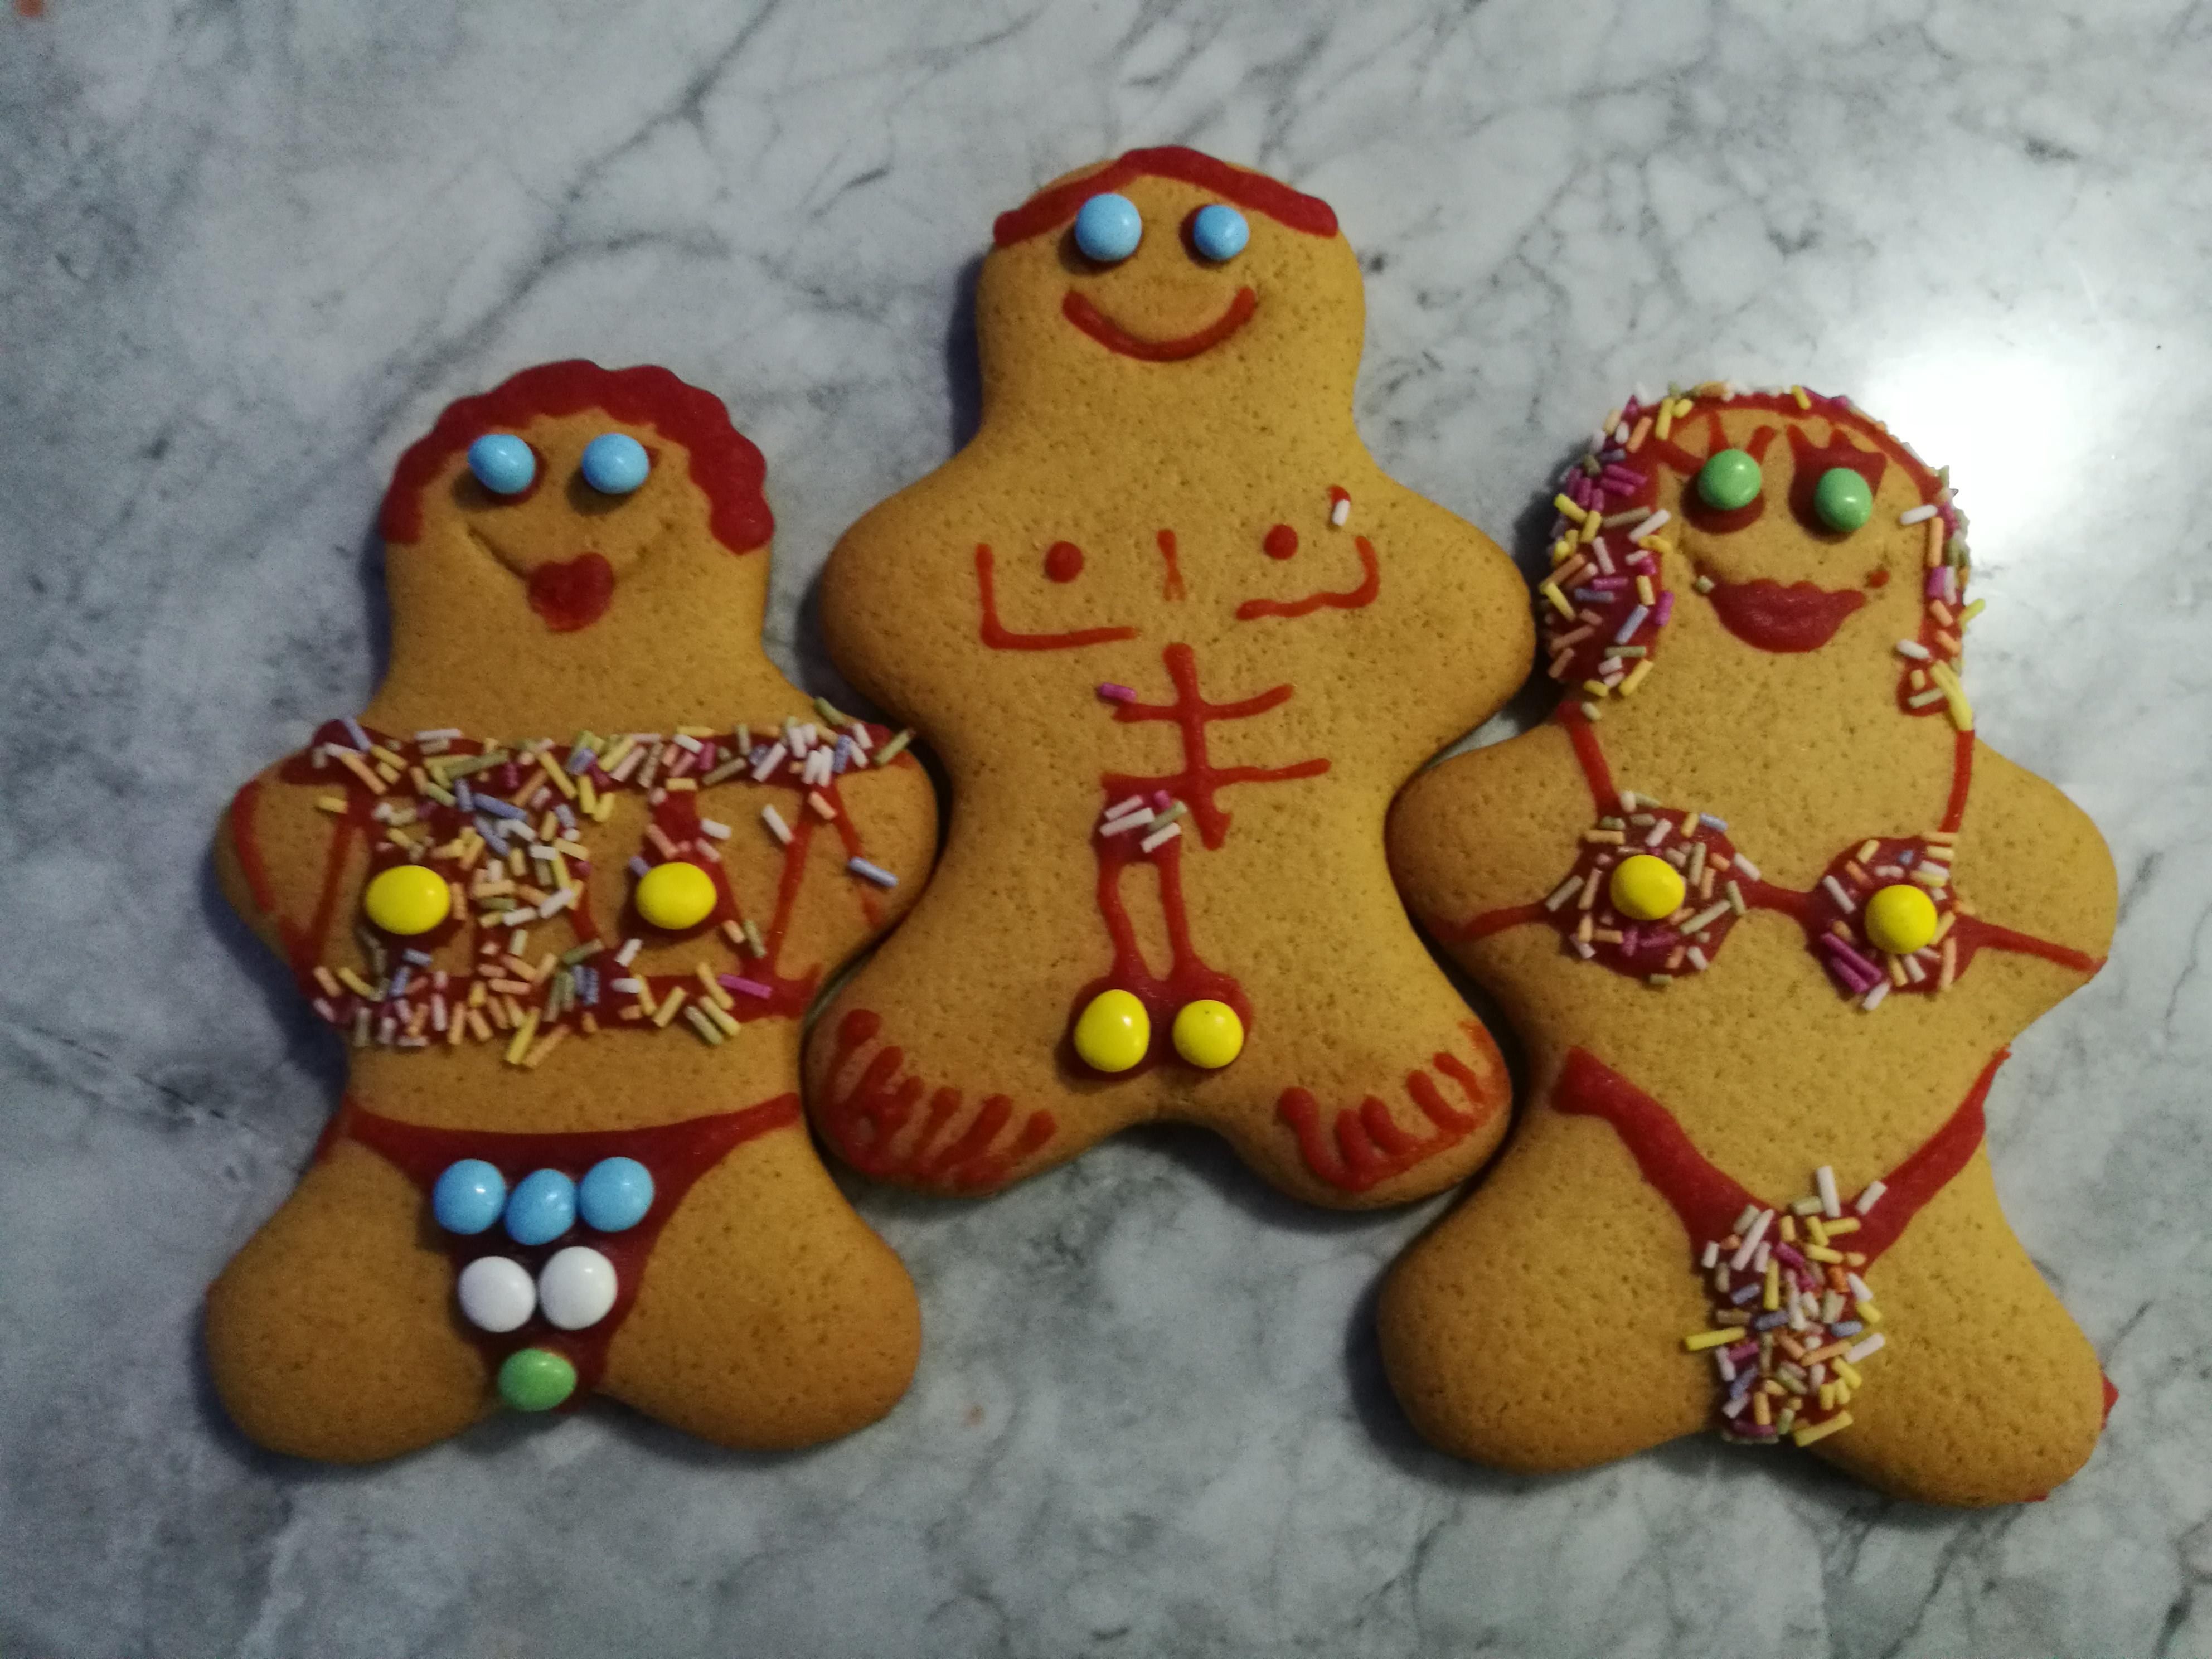 We left our 15 year old daughter to decorate the Gingerbread People.